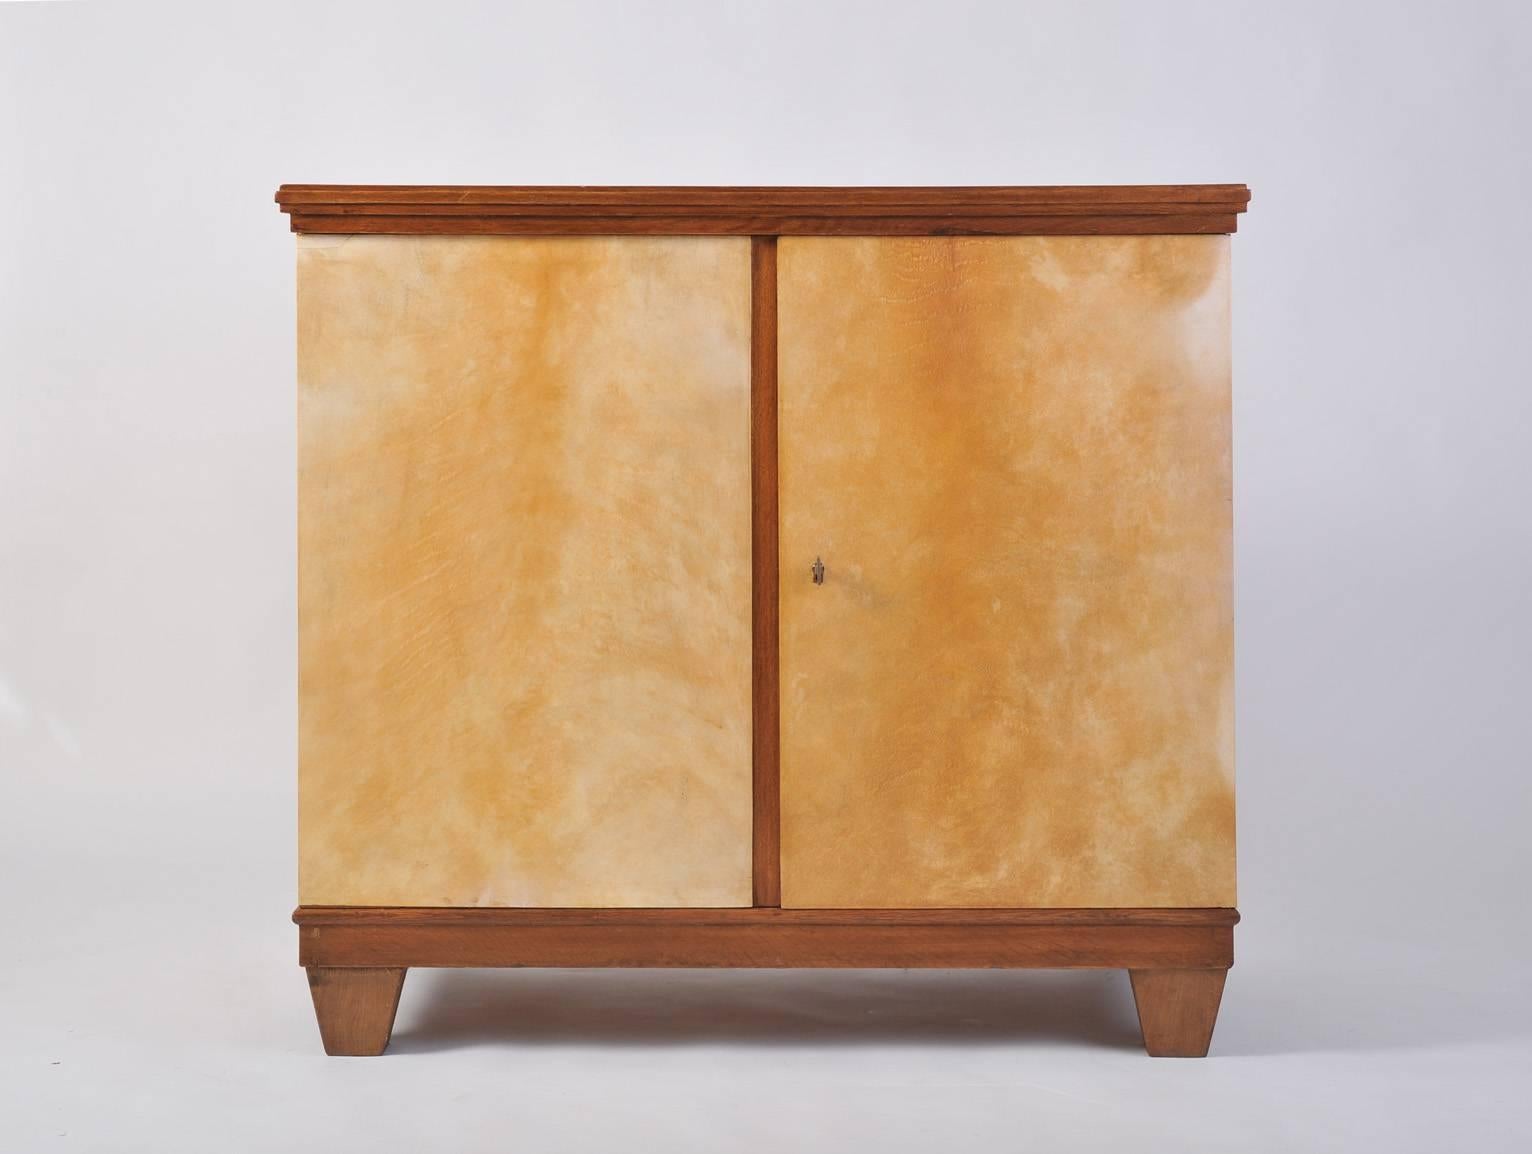 An oak and velum two-door cabinet, in the manner of Jean Michel Frank, the case clad in velum on all sides, topped by a stained oak top with moulded edges, resting on four solid square tapering feet, revealing a central shelf, the doors internally